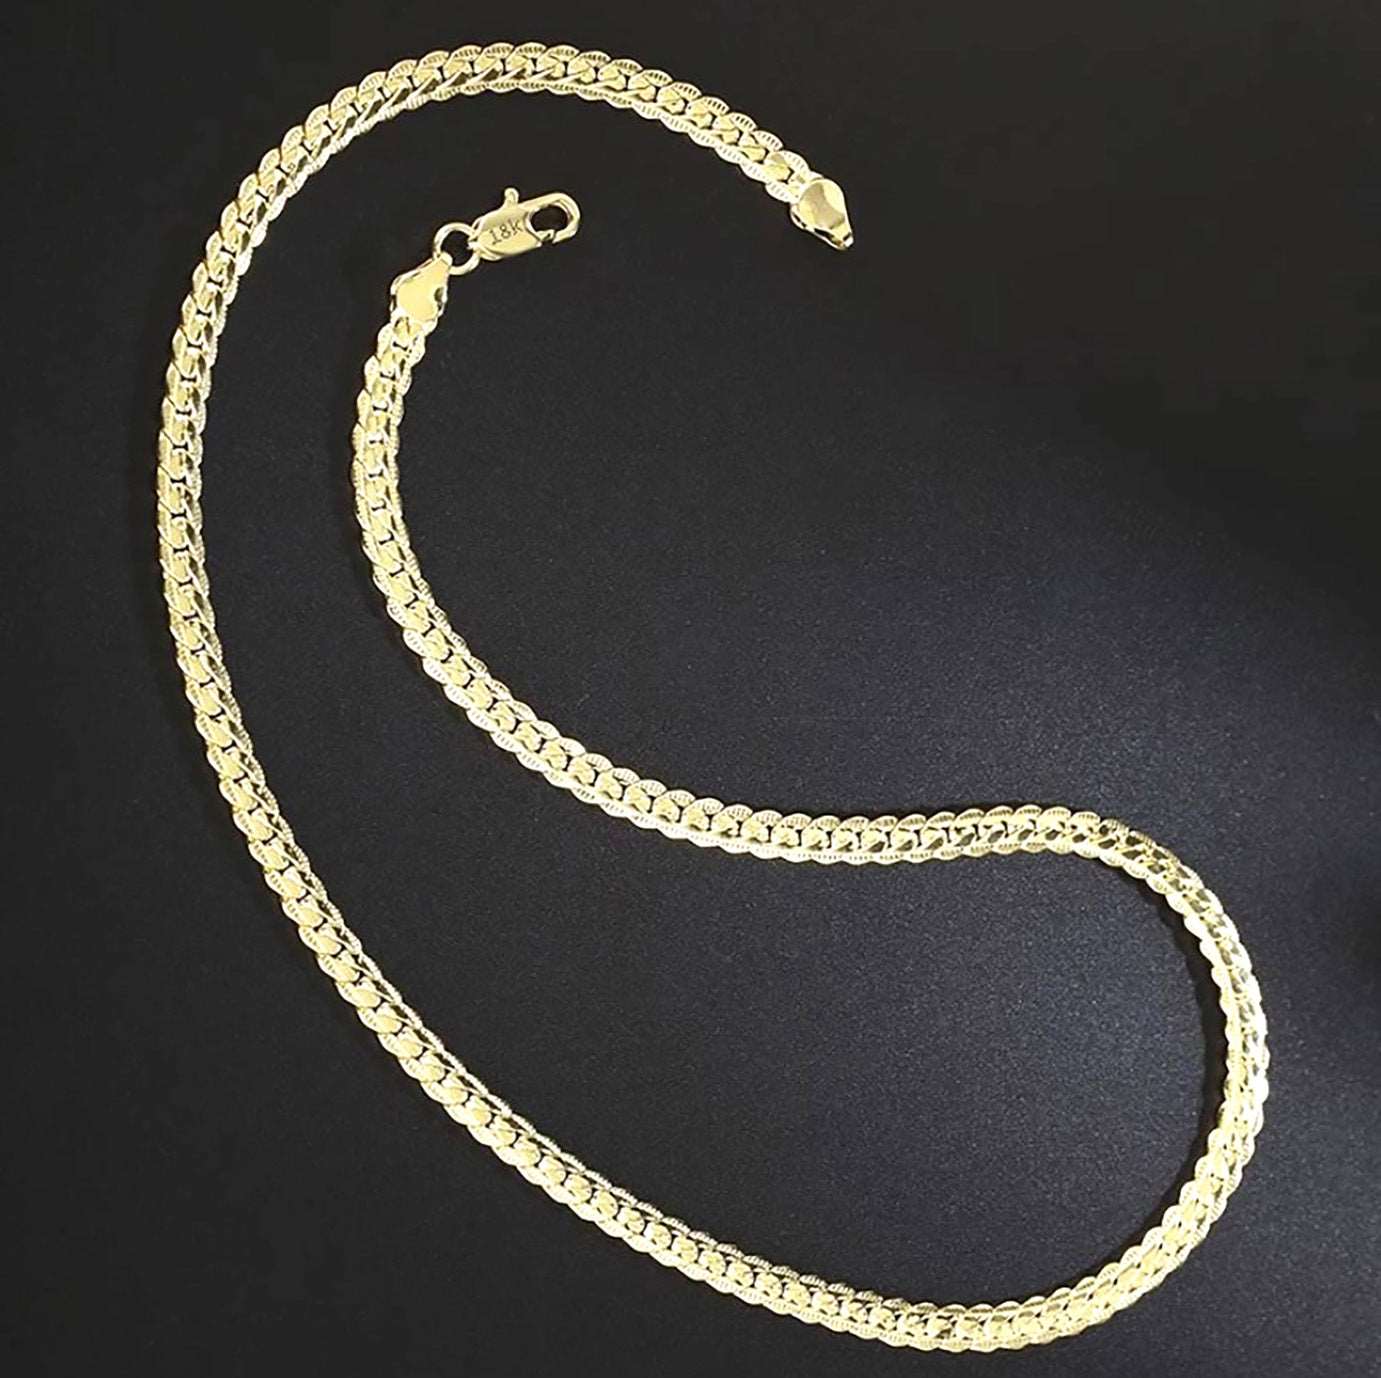 18K Gold clad over 925 solid sterling silver sideways chain - Providence silver gold jewelry usa